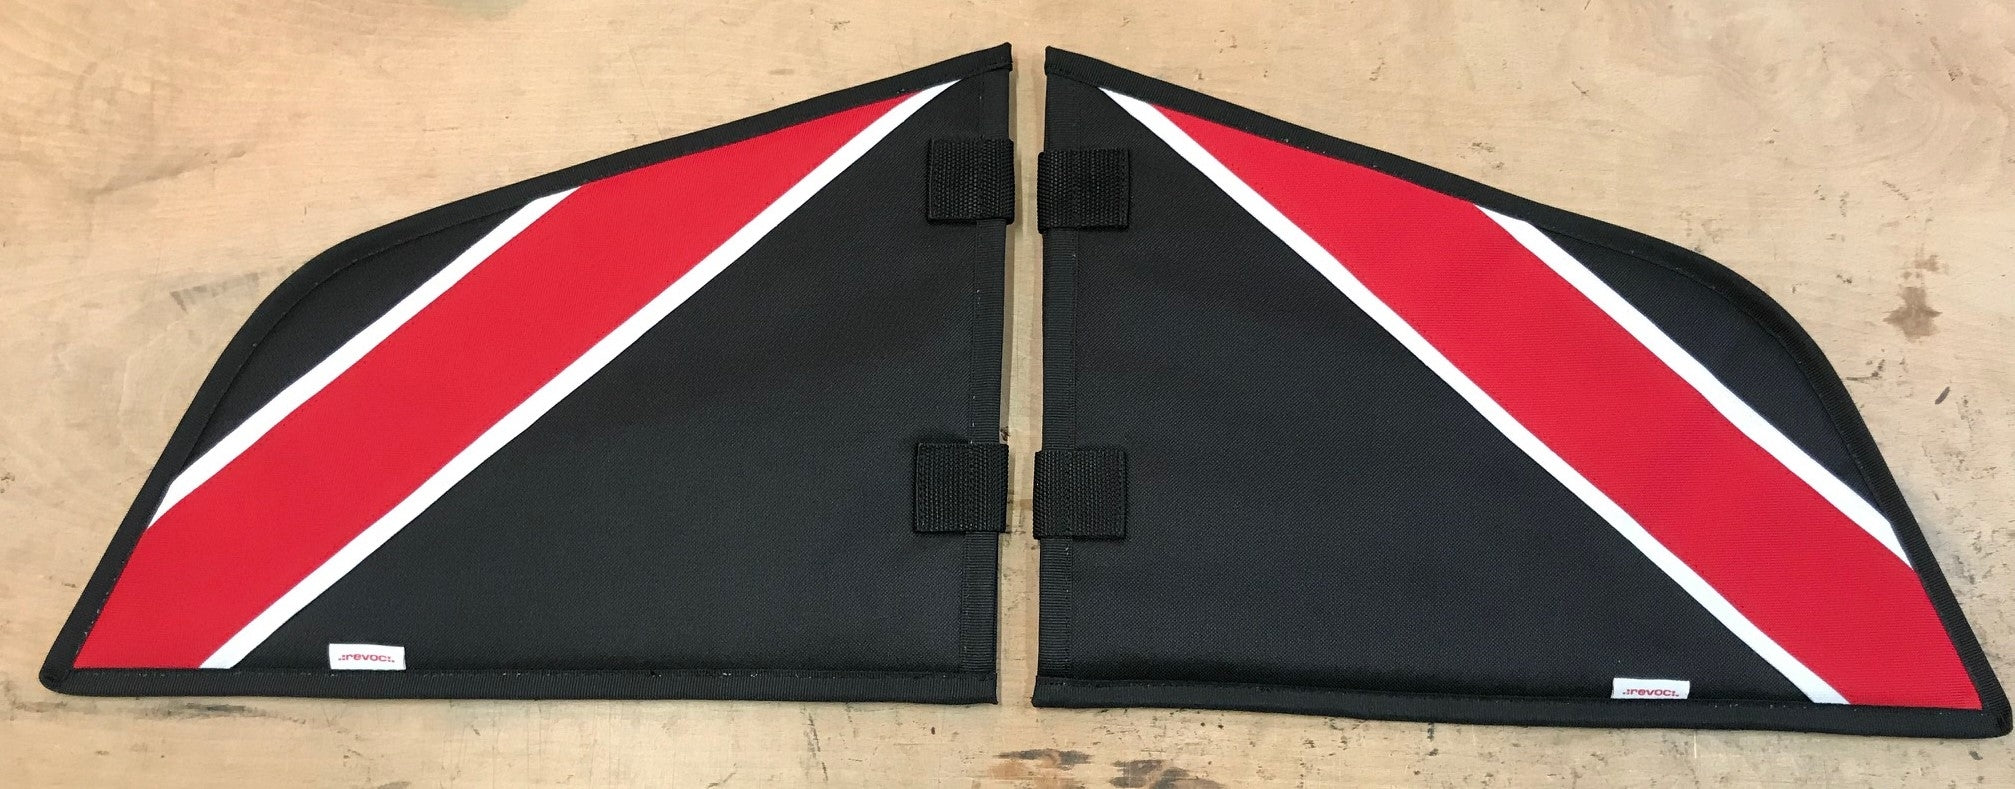 Revoc Krill Avanti S Complete Wing and Tail Bag Set